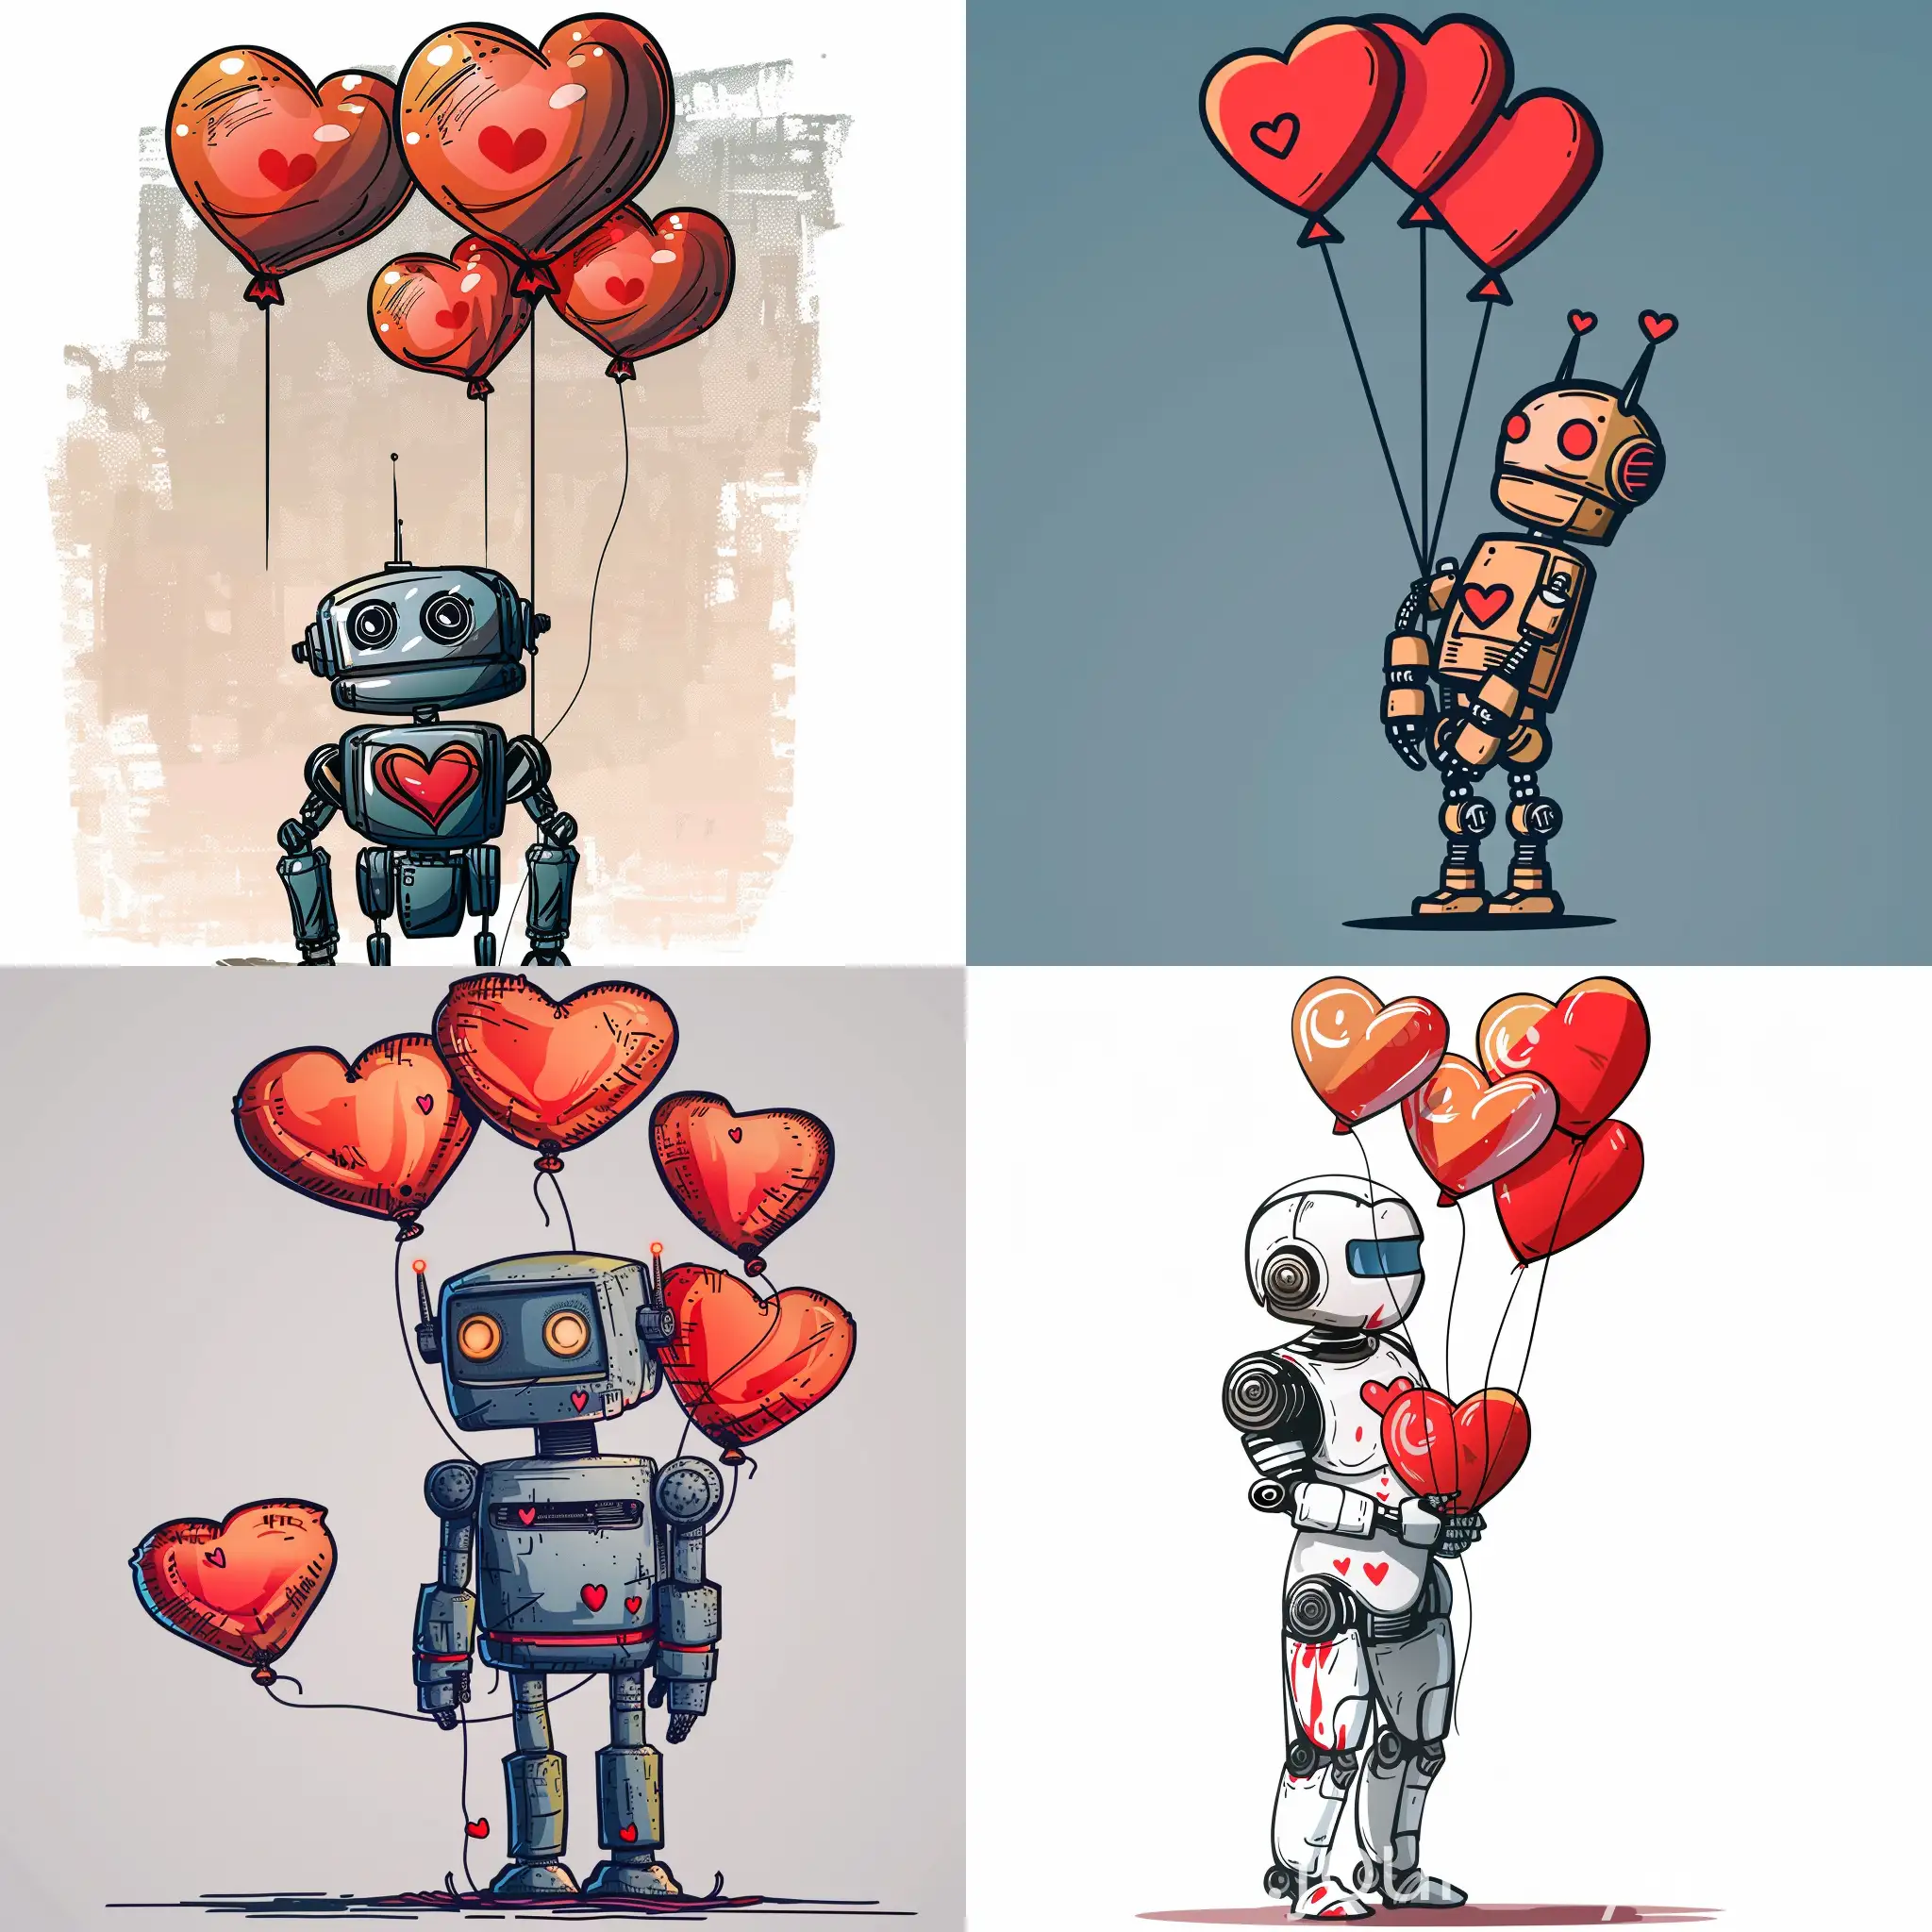 cartoon illustration of robot with red heart balloons, in high quality details 